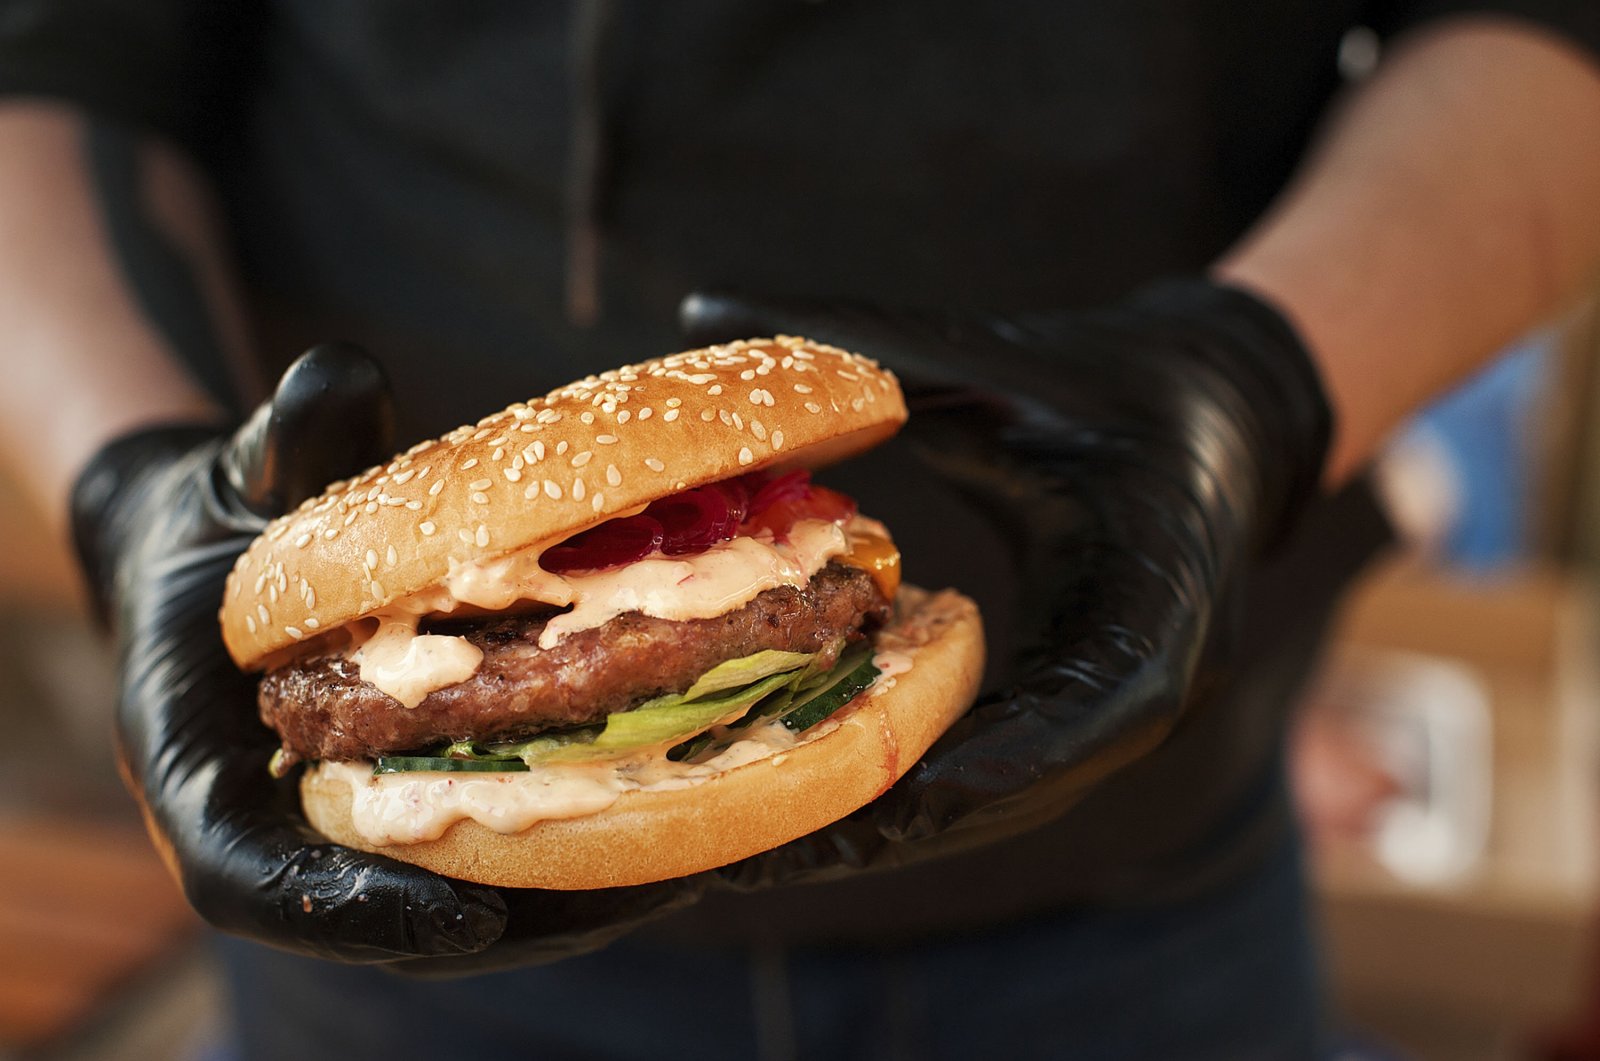 A photo showing a person wearing plastic gloves and holding a burger in hand. (Photo by Shutterstock)